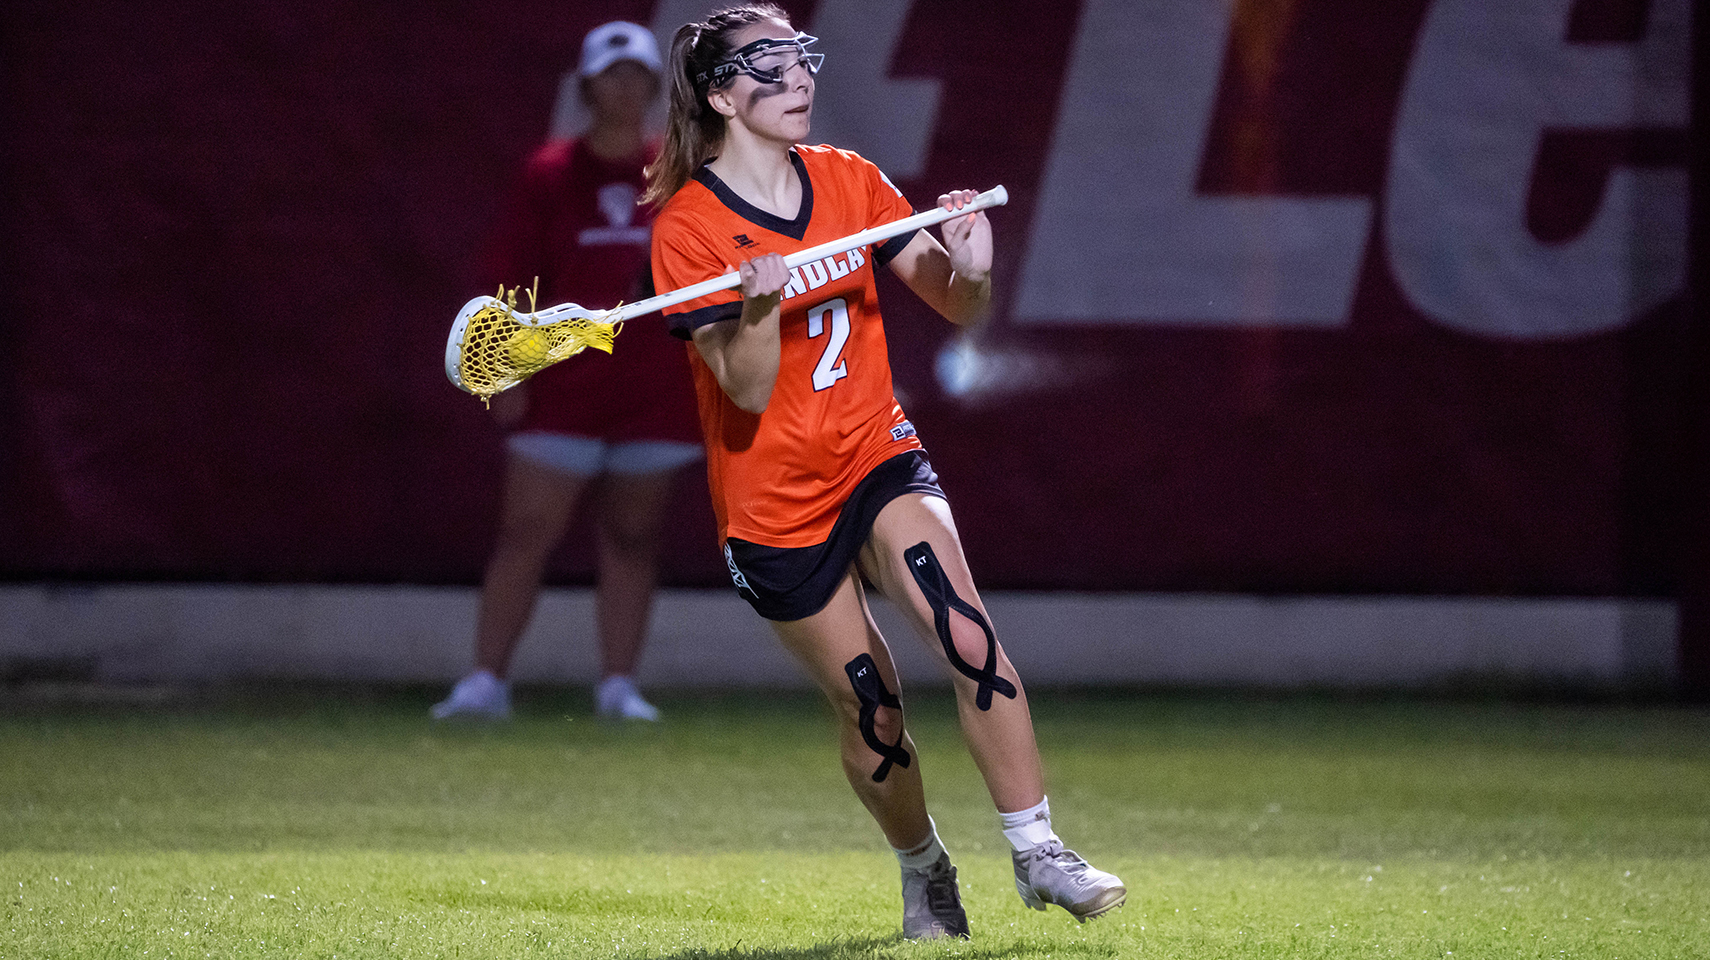 Women's lacrosse player looking to pass